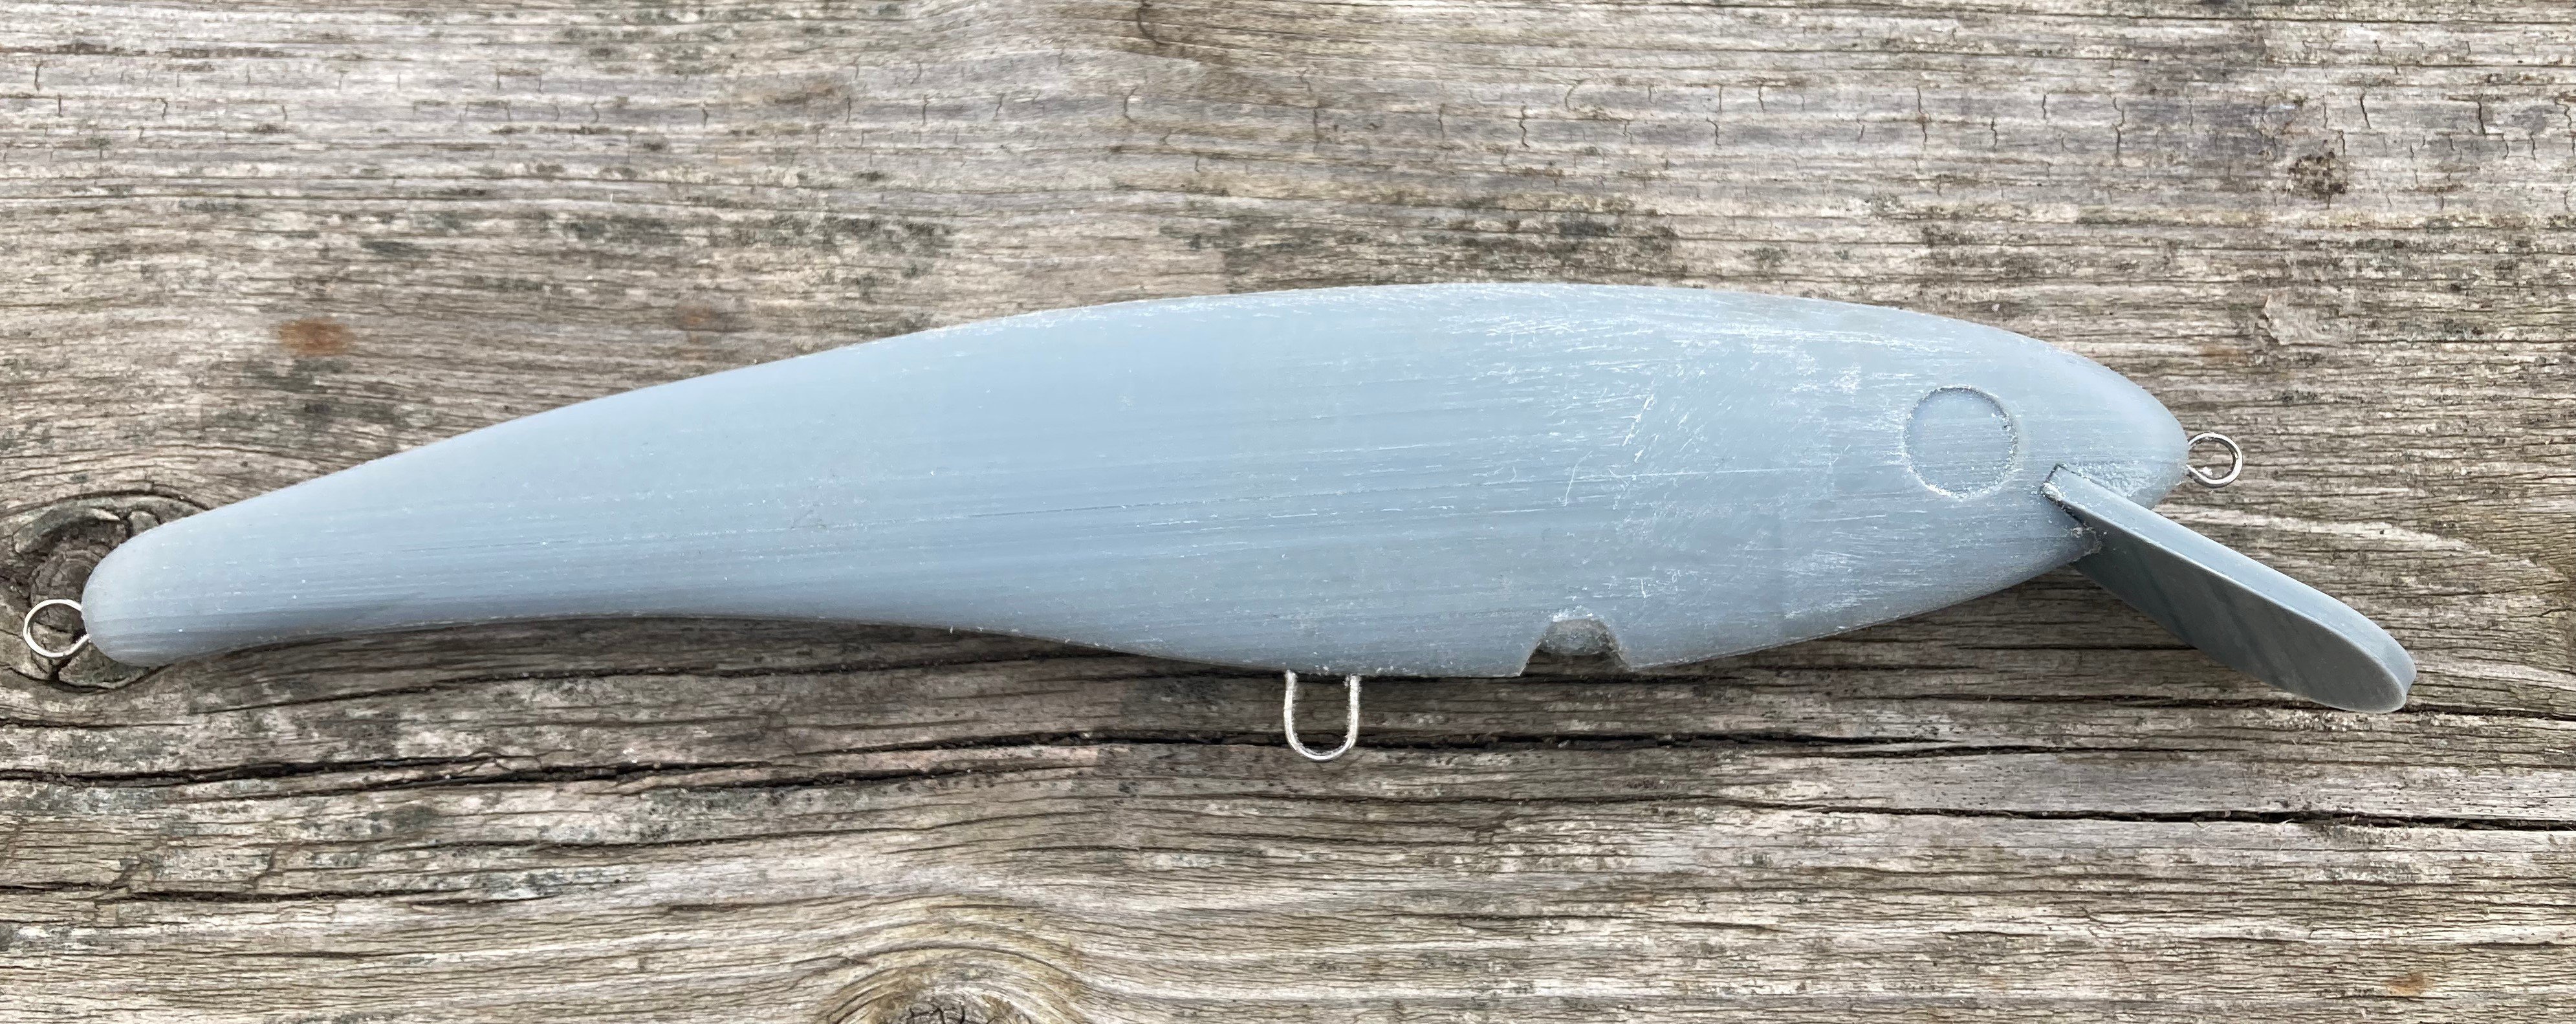 Finally got some 3d printed proto types - Hard Baits -   - Tackle Building Forums